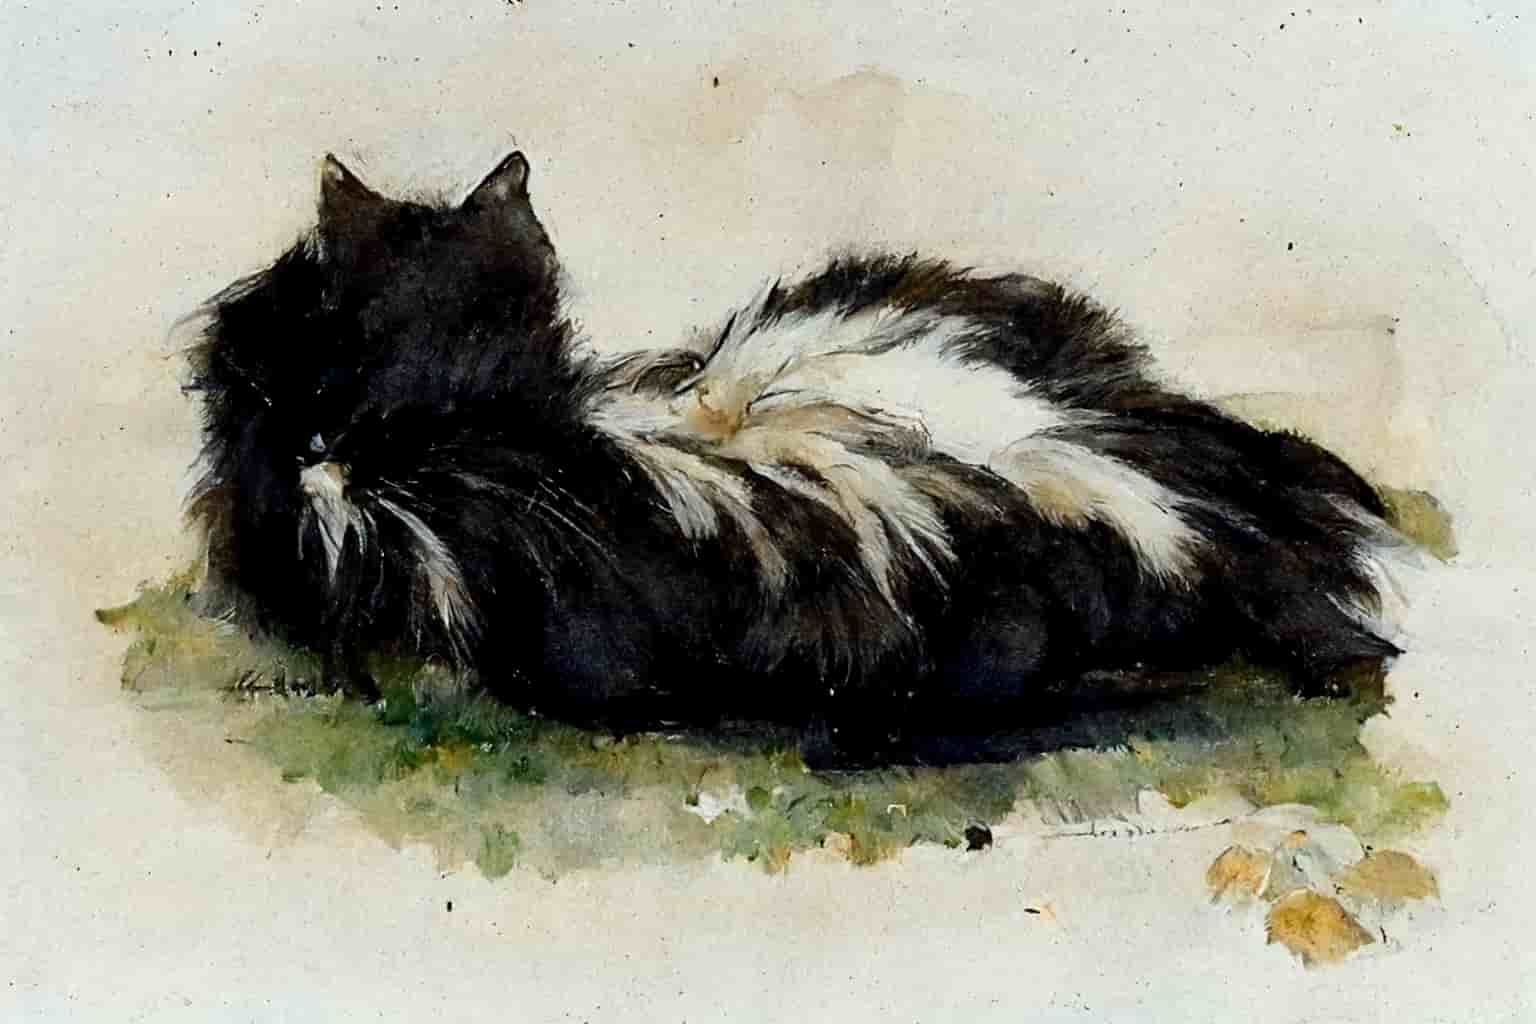 a long-haired cat with black and white fur lying on the ground, looking at something off in the distance, watercolor